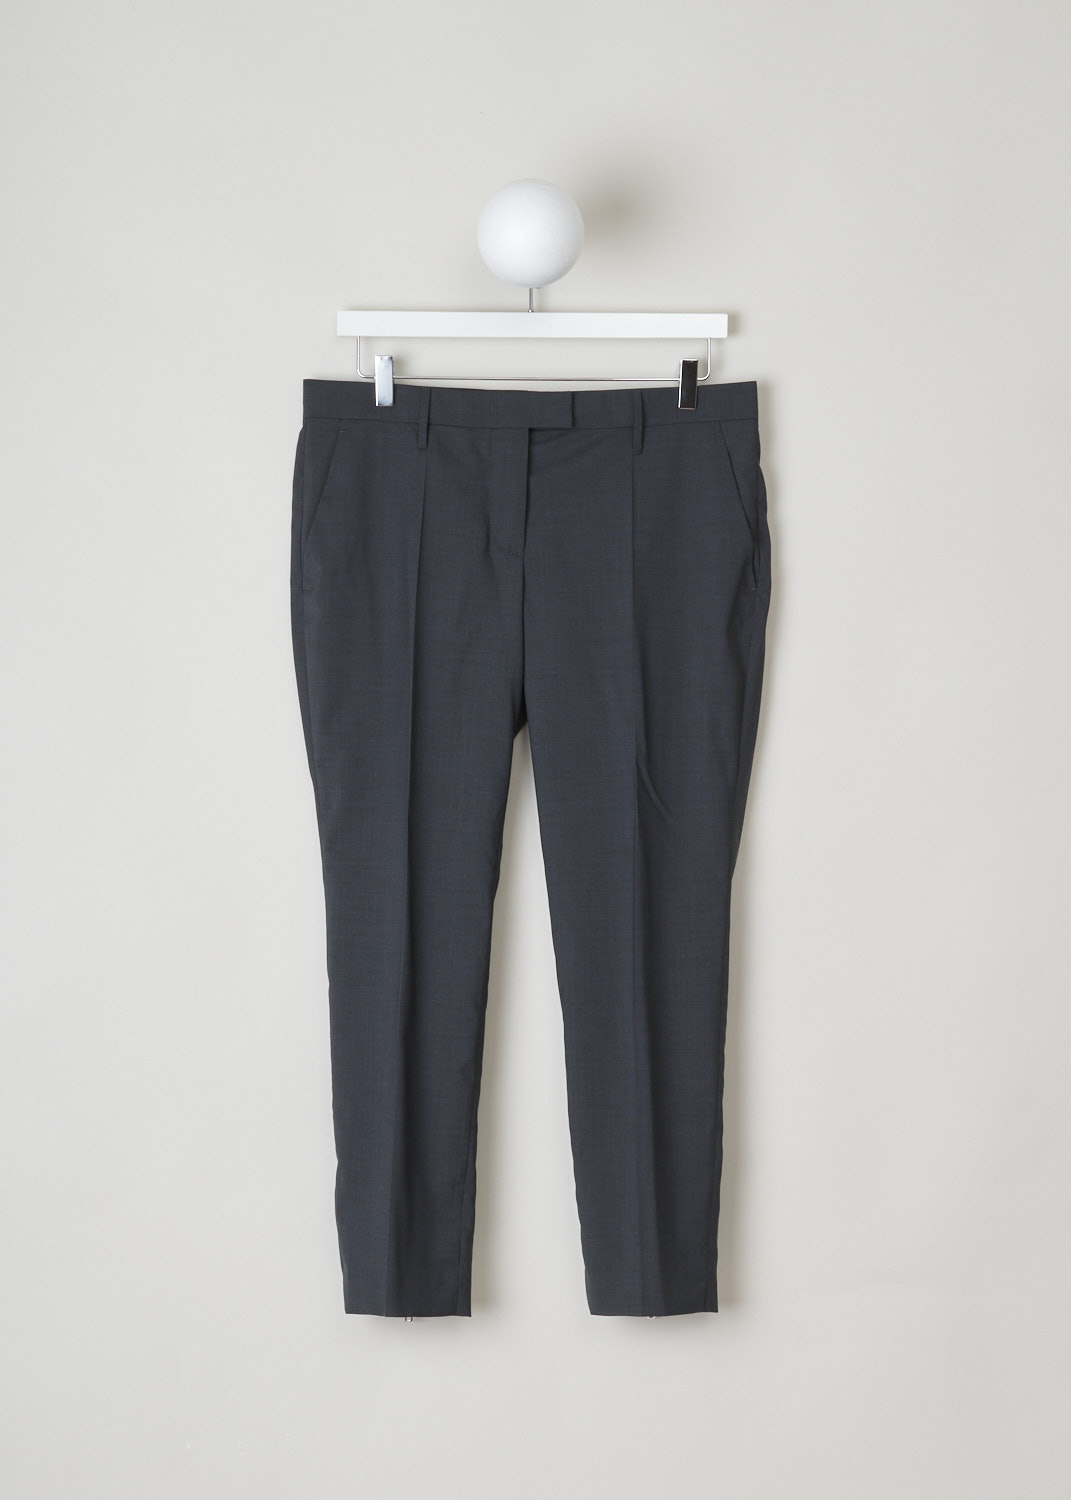 Prada, Charcoal coloured flat-front pants, lana_leggera_P201C_F0480_ardesia, grey, front, A well hidden, but nevertheless a lovely feature about this flat-front pants are the silver-tone zippers used on the legs, it adds that little bit of extra excitement. Further decorating the front are two forward slanted pockets, and the fastening option. And adorning the back are two jetted pockets. 